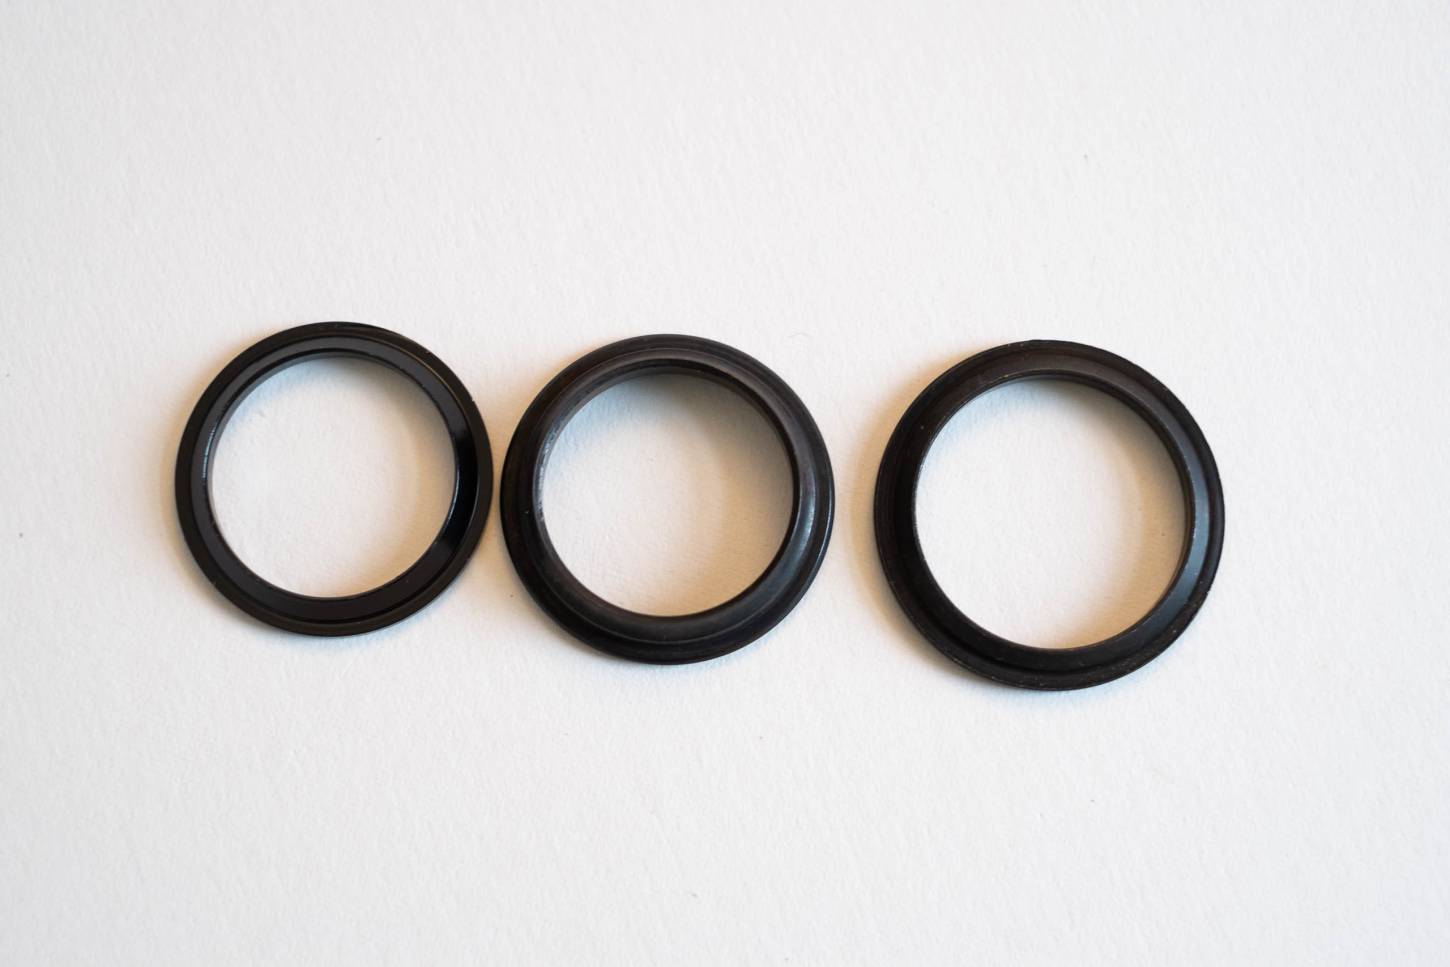 Tange steel cone ring variants for 1" or 1 1/8" headsets